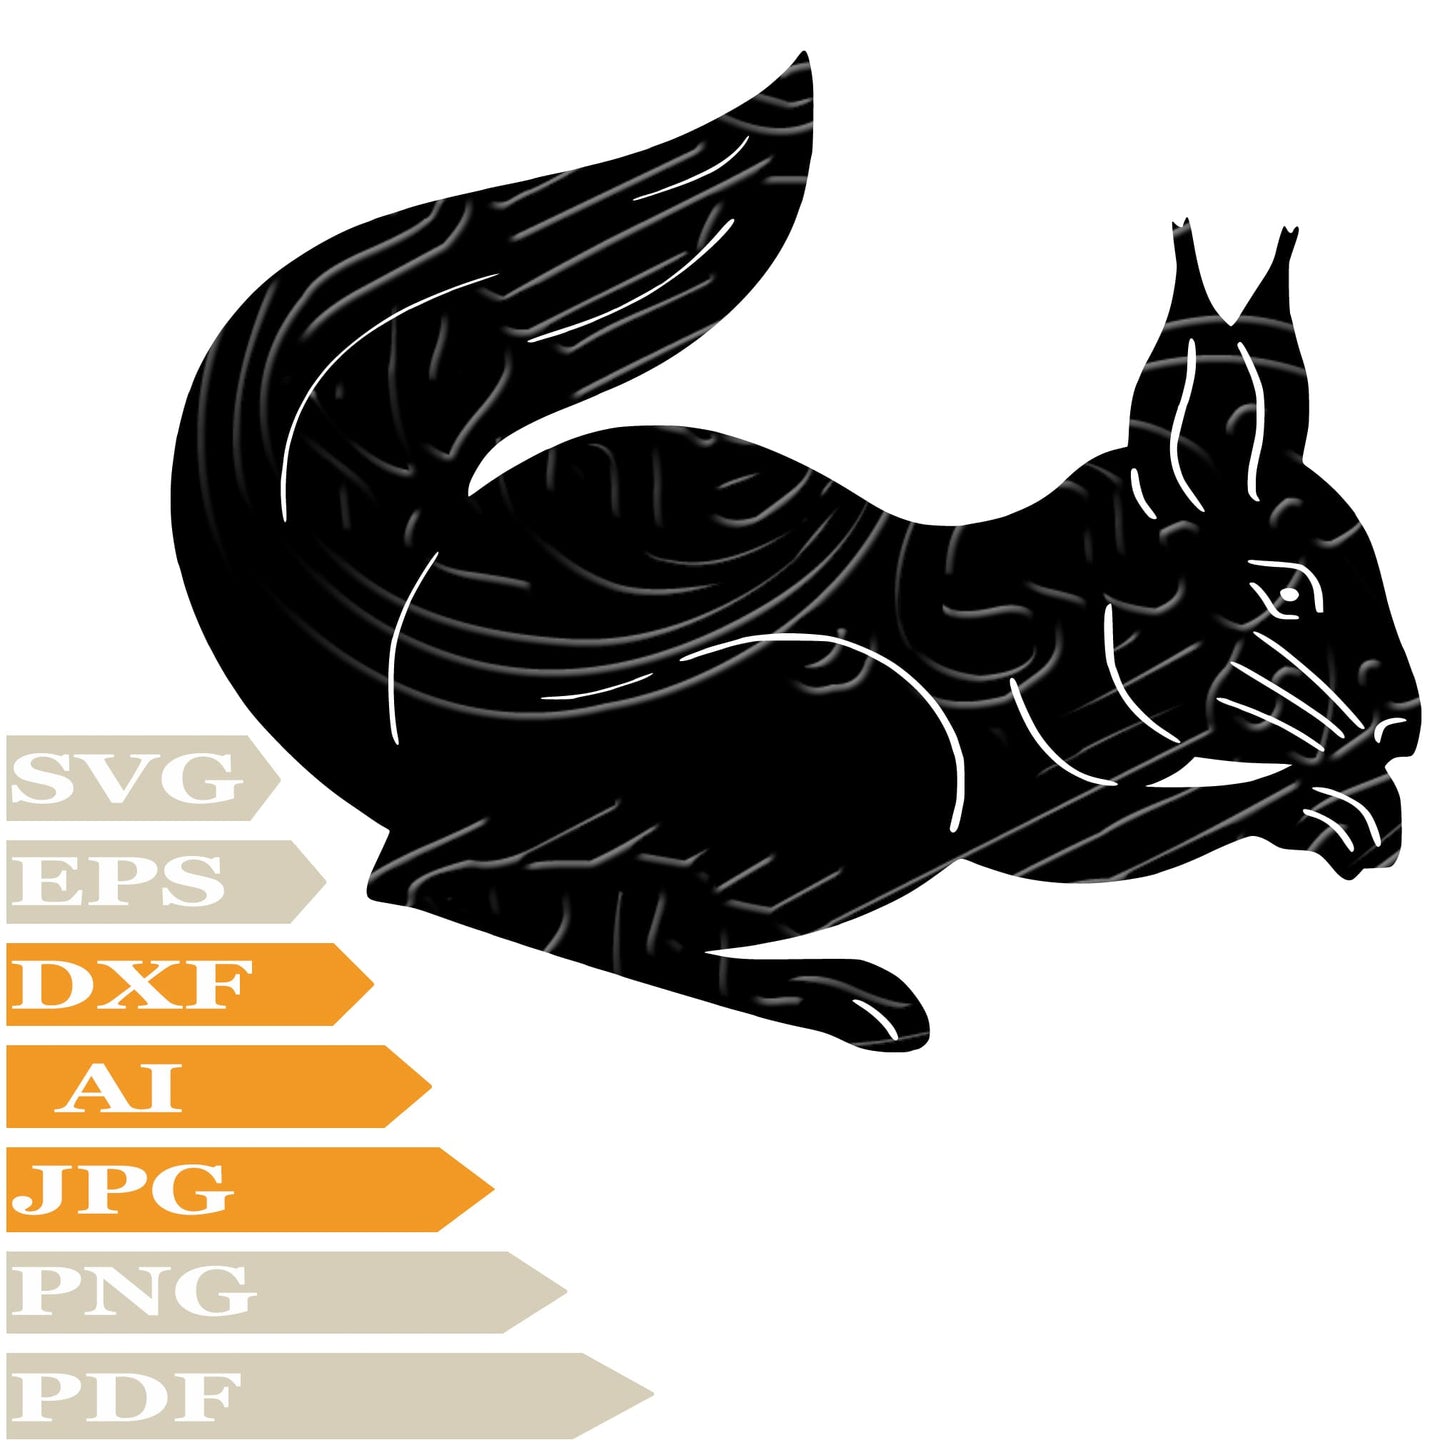 Squirrel, Funny Squirrel Svg File, Image Cut, Png, For Tattoo, Silhouette, Digital Vector Download, Cut File, Clipart, For Cricut